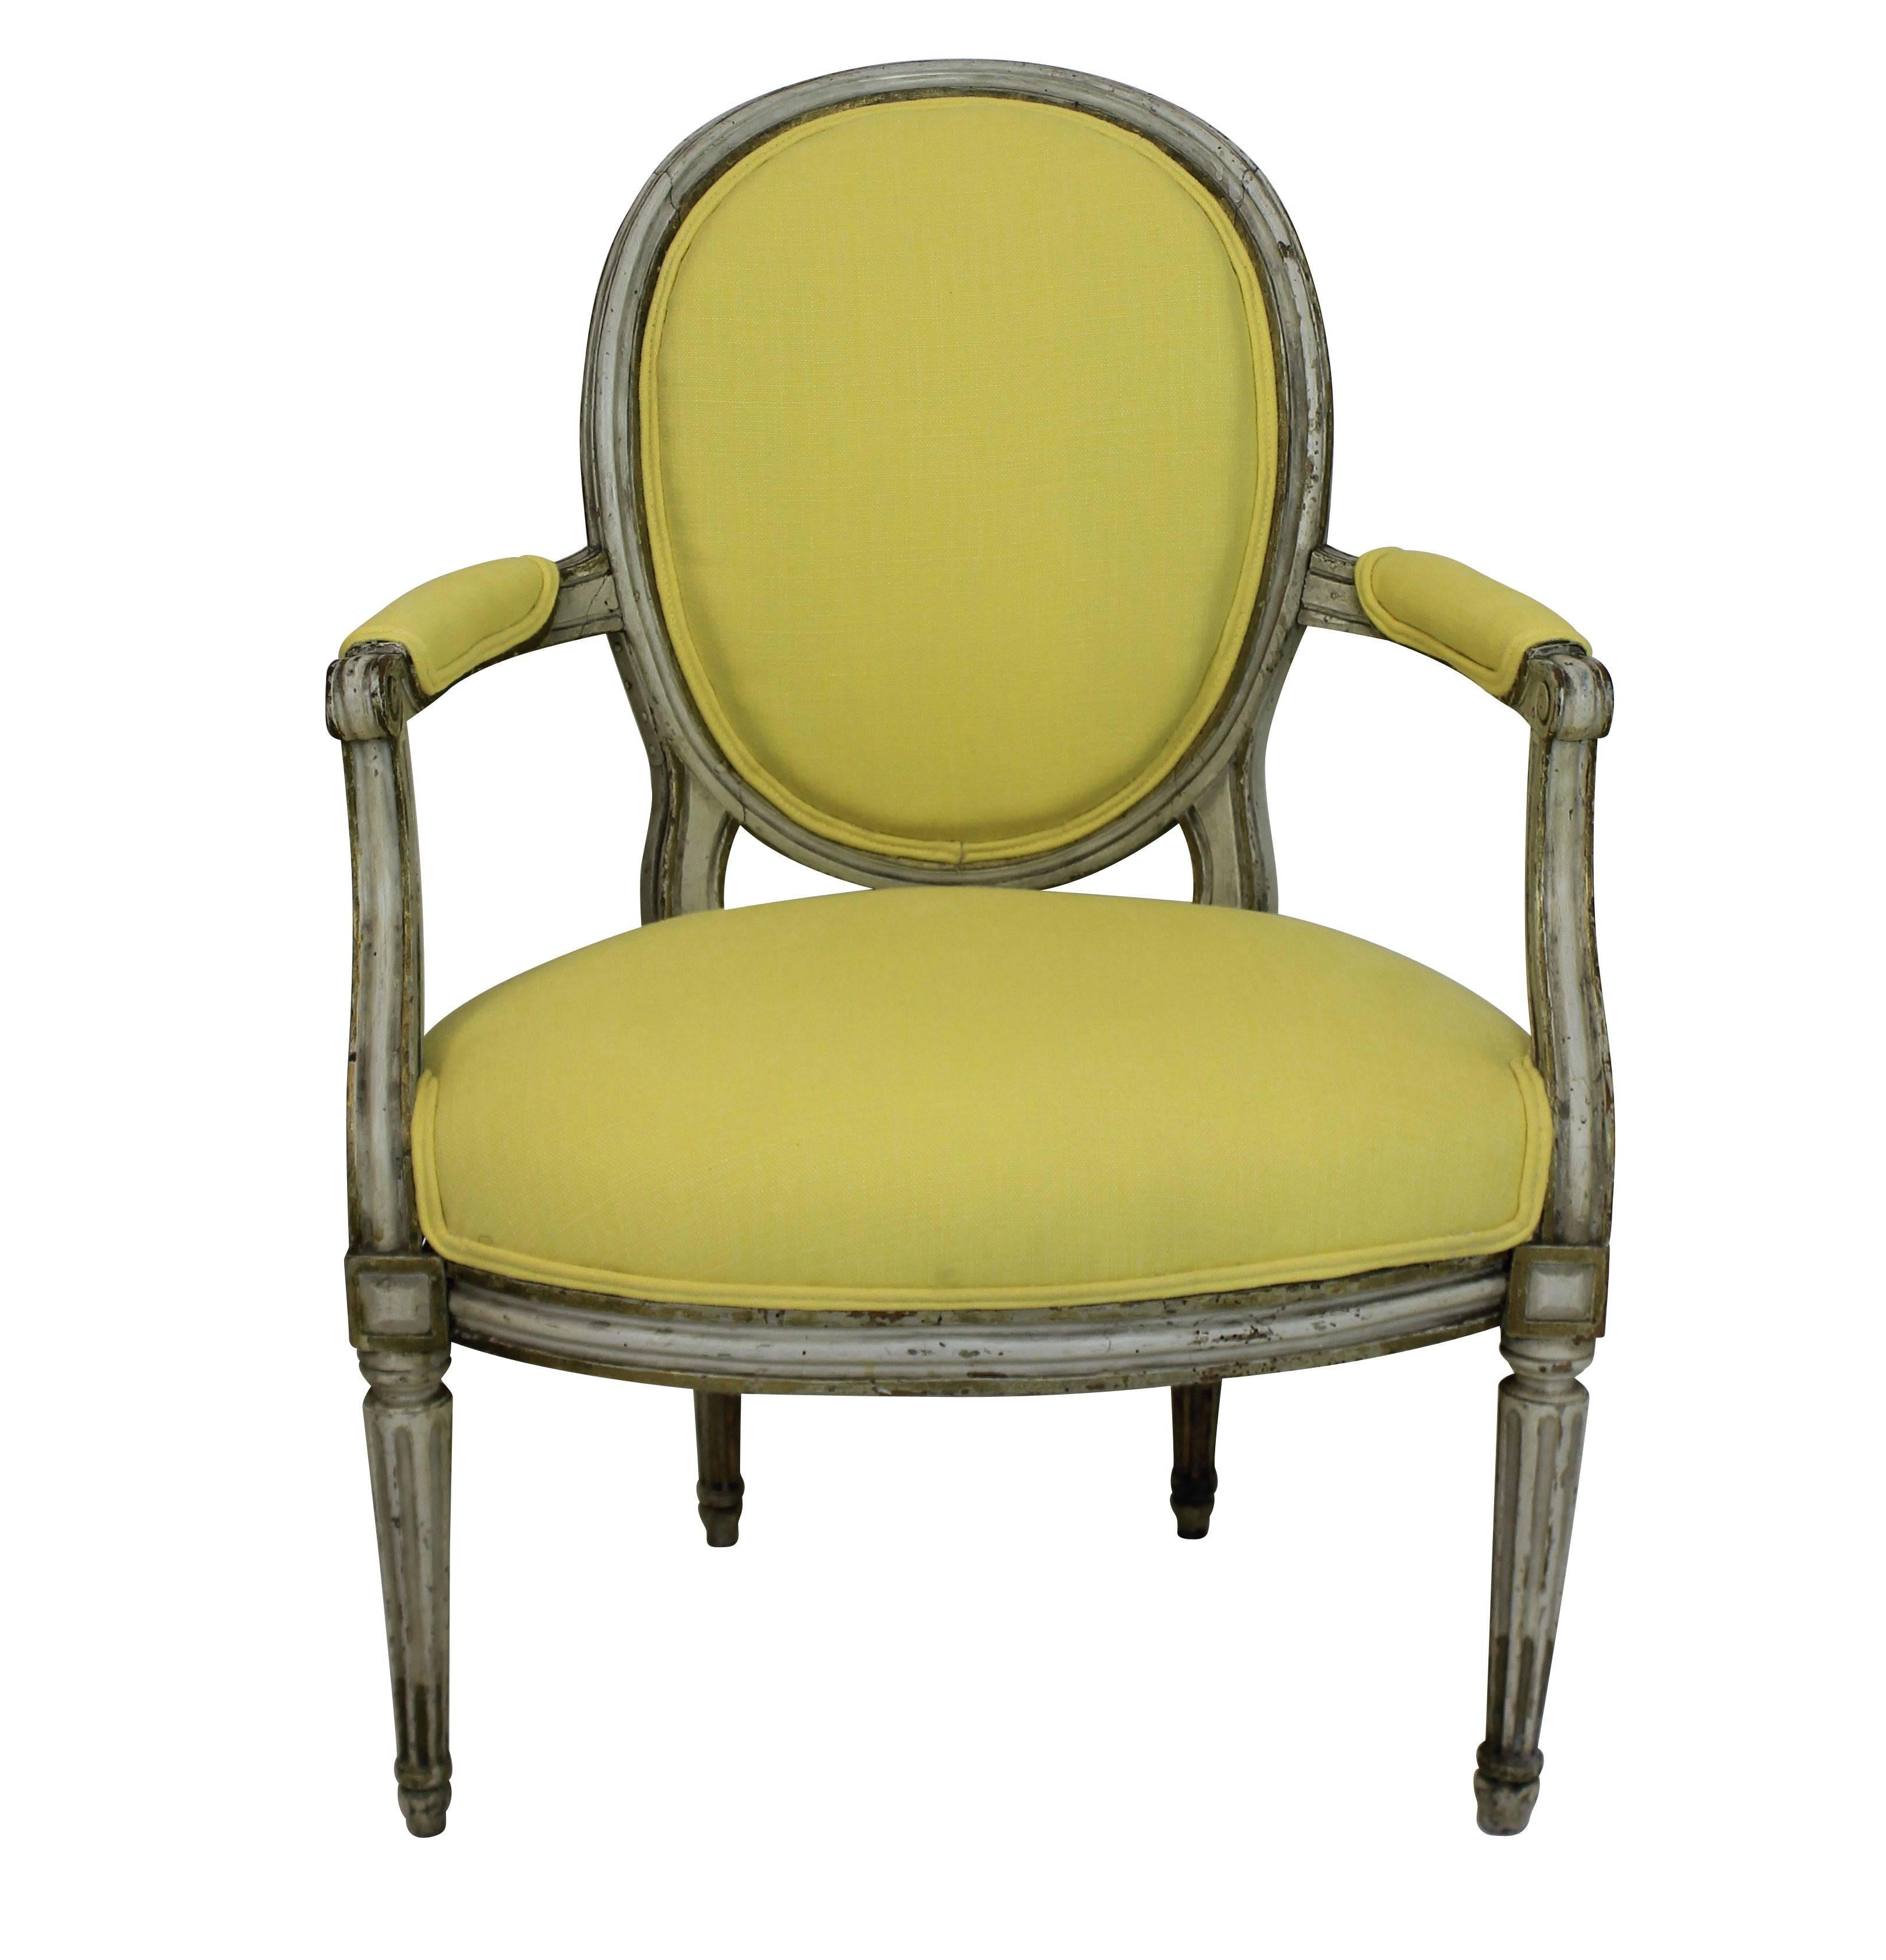 A pair of French 18th century painted armchairs. In their original condition, newly upholstered in Pierre Frey lemon linen.